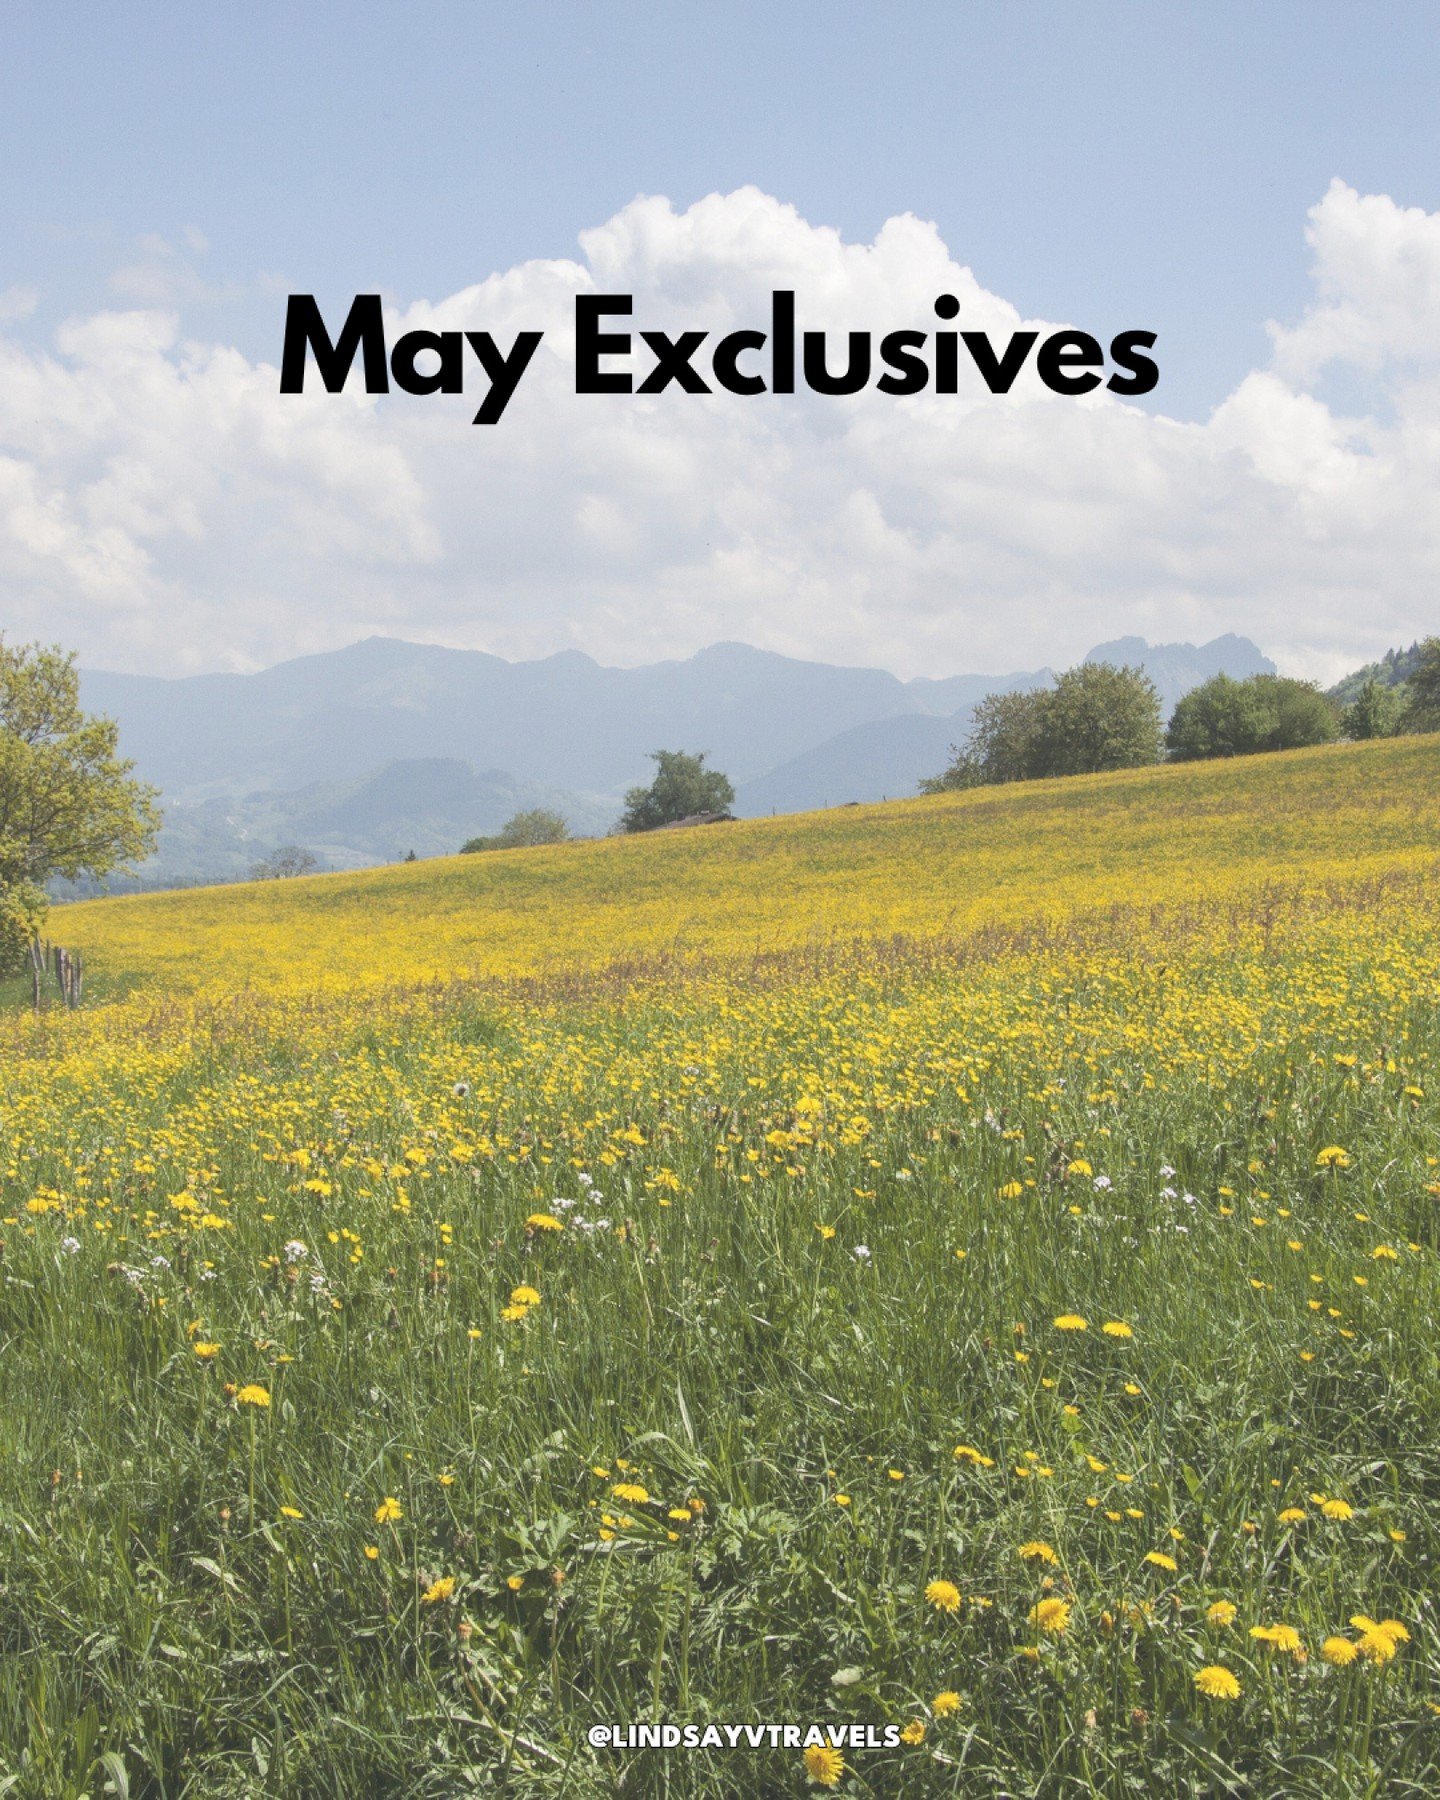 May is calling, and it's wrapped in exclusive deals just for you! 

🌟💼 Imagine strolling through lavender fields in Provence, sailing the serene waters of the Amalfi Coast, or capturing the sunset from a Santorini terrace. With our May-exclusive tr